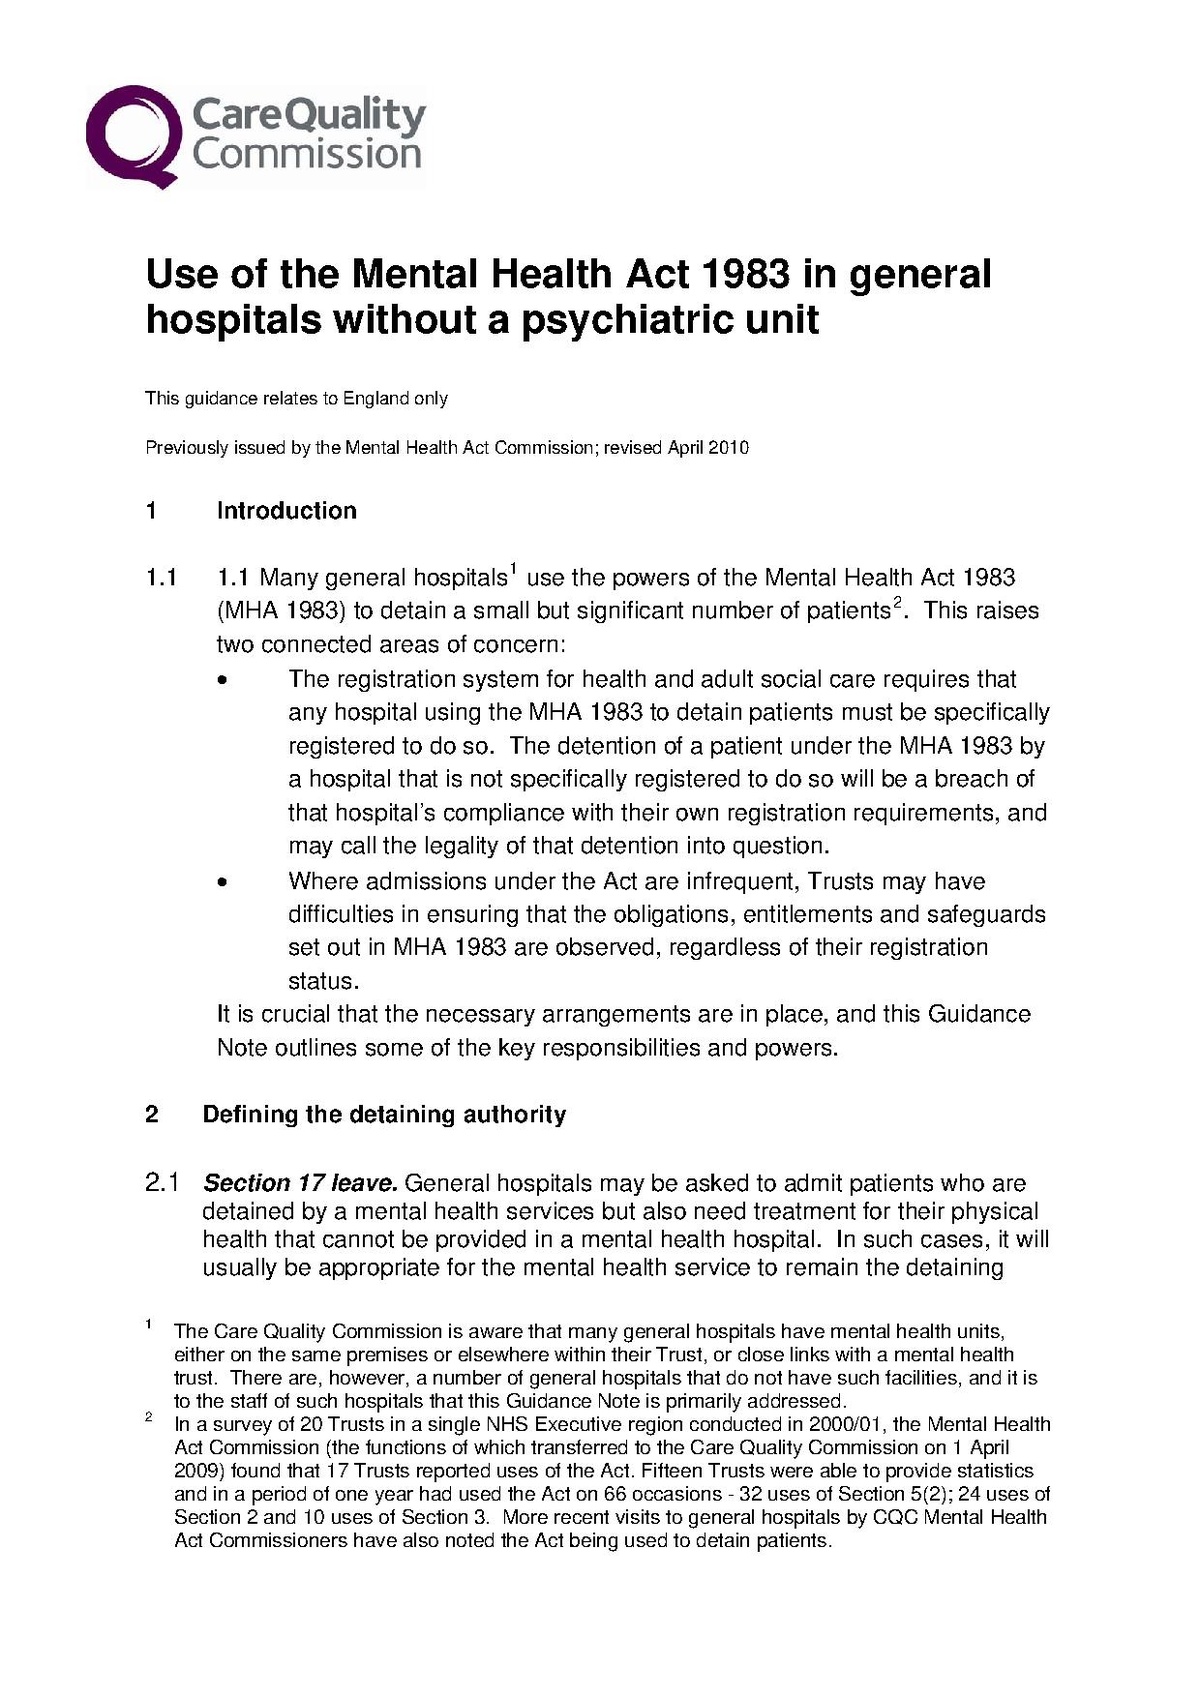 CQC, 'Use of the Mental Health Act 1983 in general